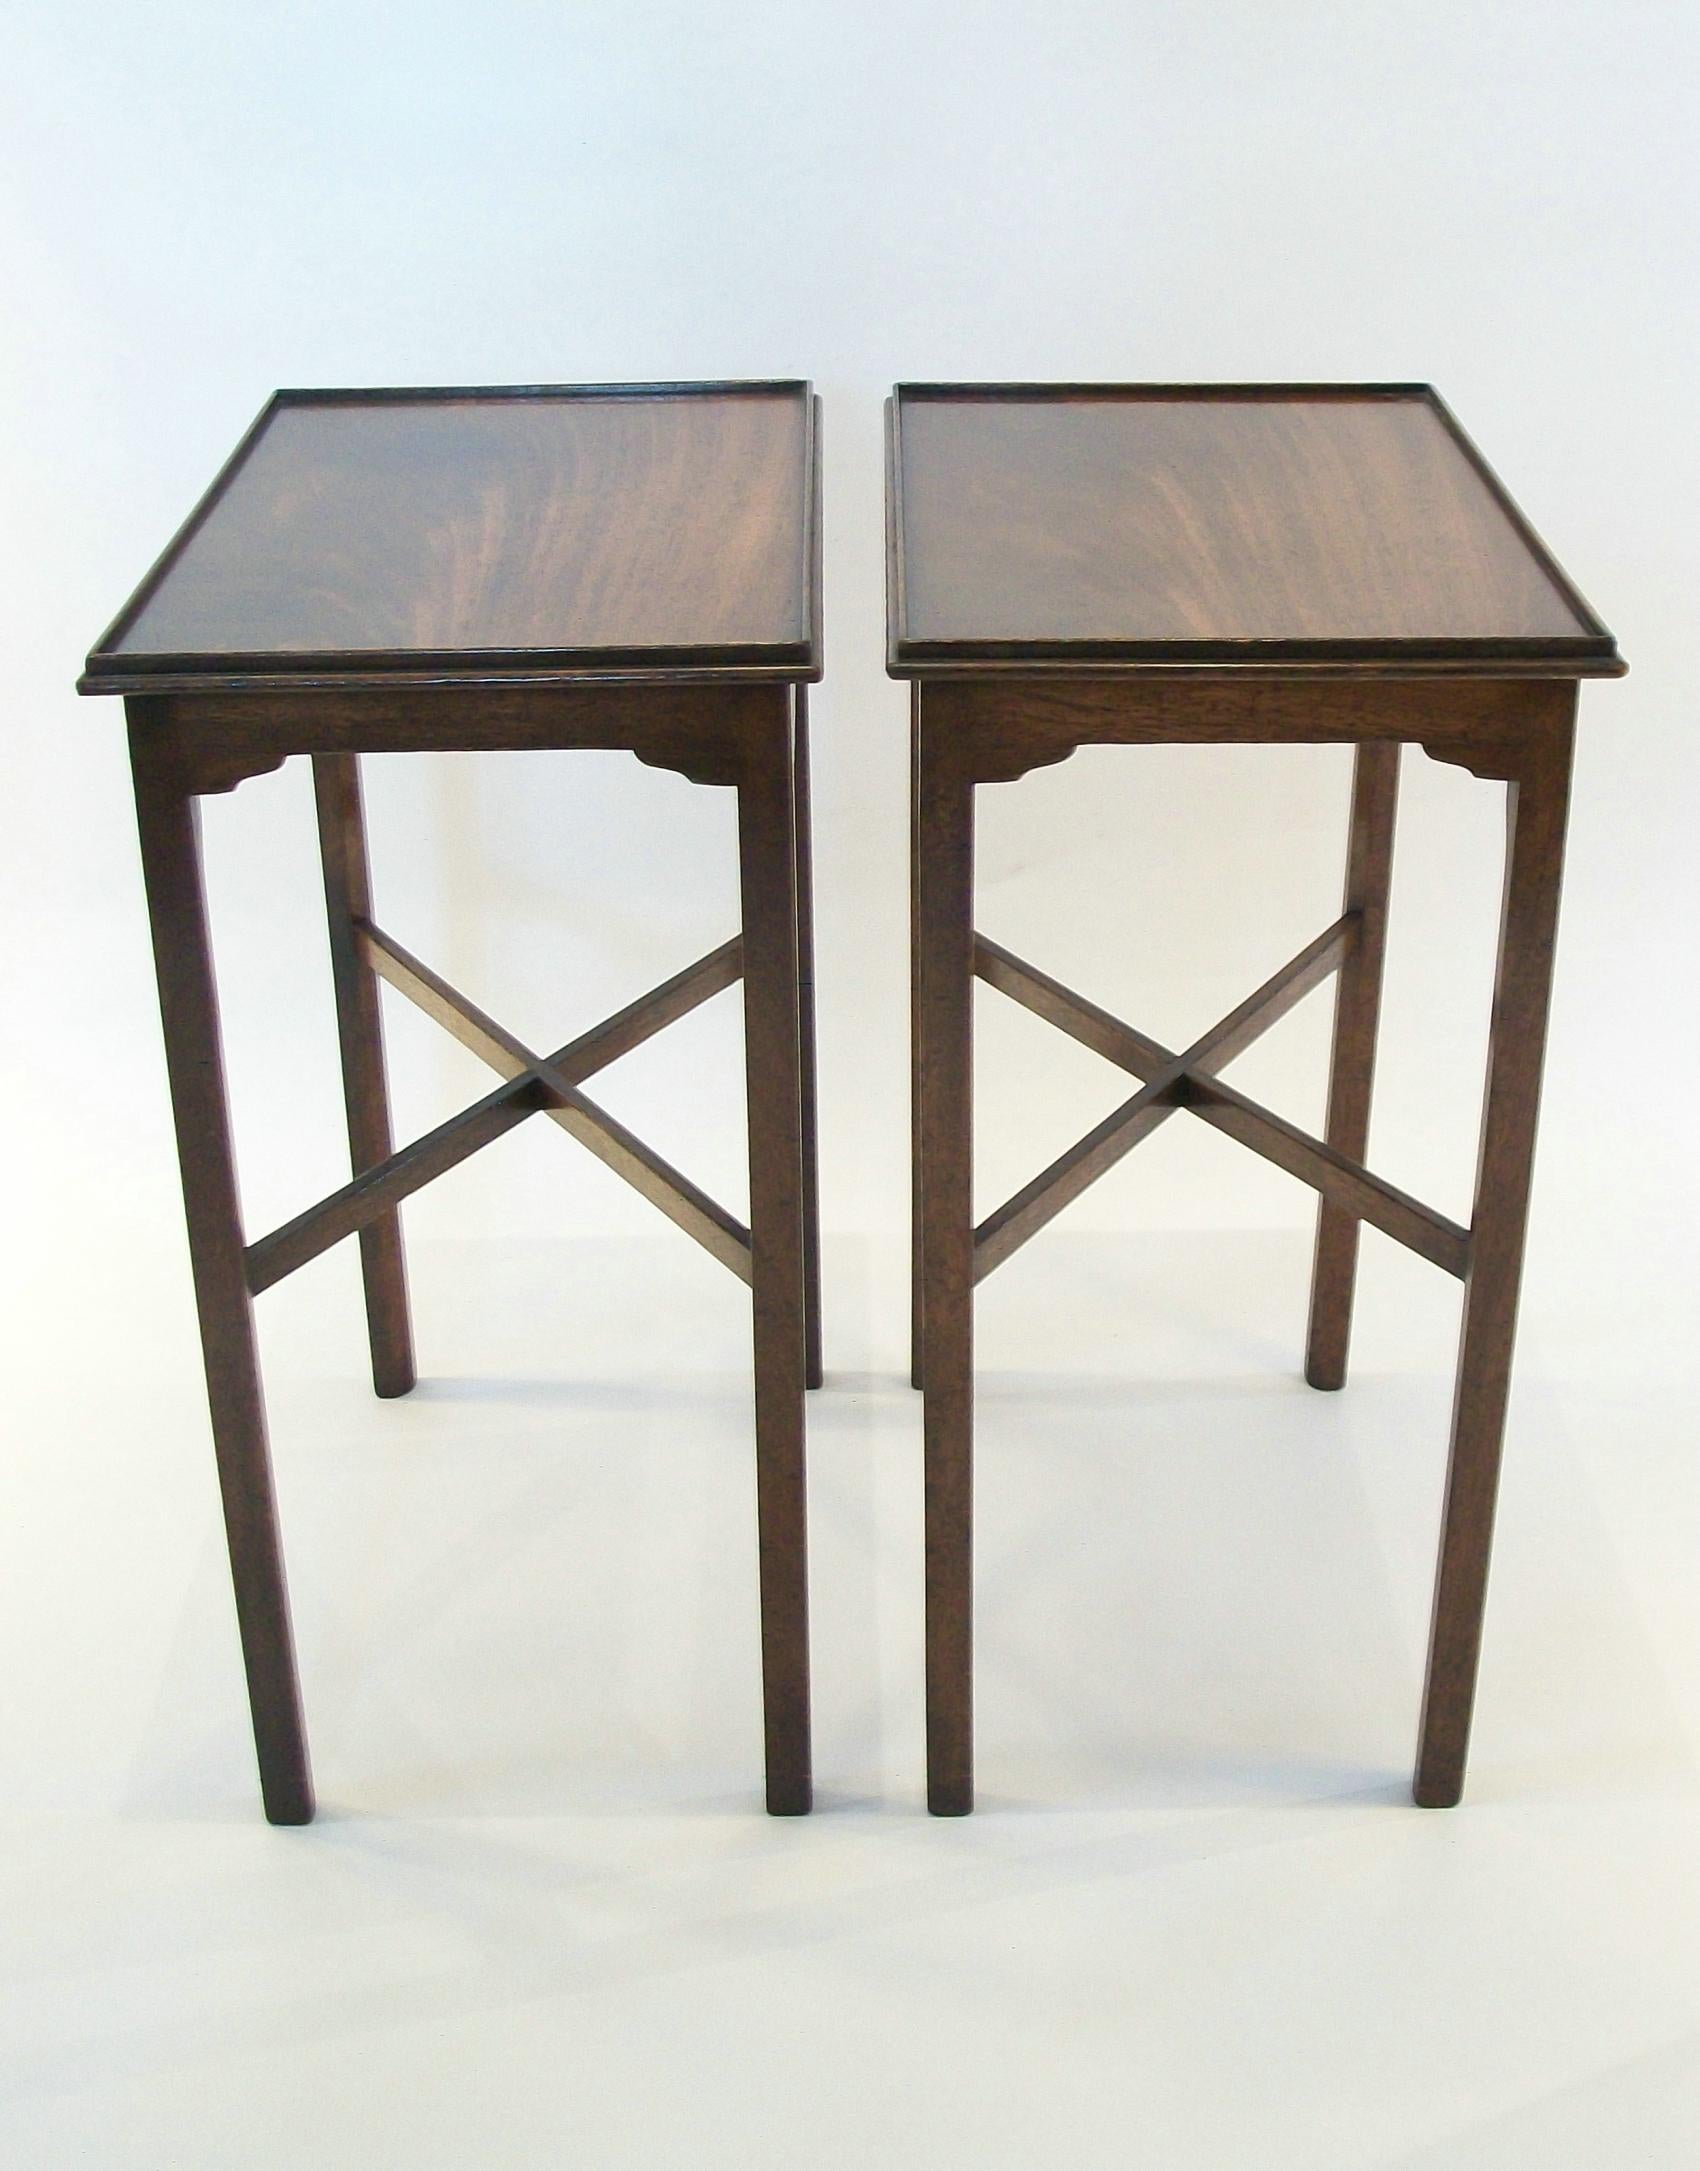 Fine pair of elegant Georgian style hardwood side tables - exceptional quality with warm patina - featuring flamed wood tops with galleried edges - finished on all four sides - interior chamfers to the straight legs with cross stretchers - plain